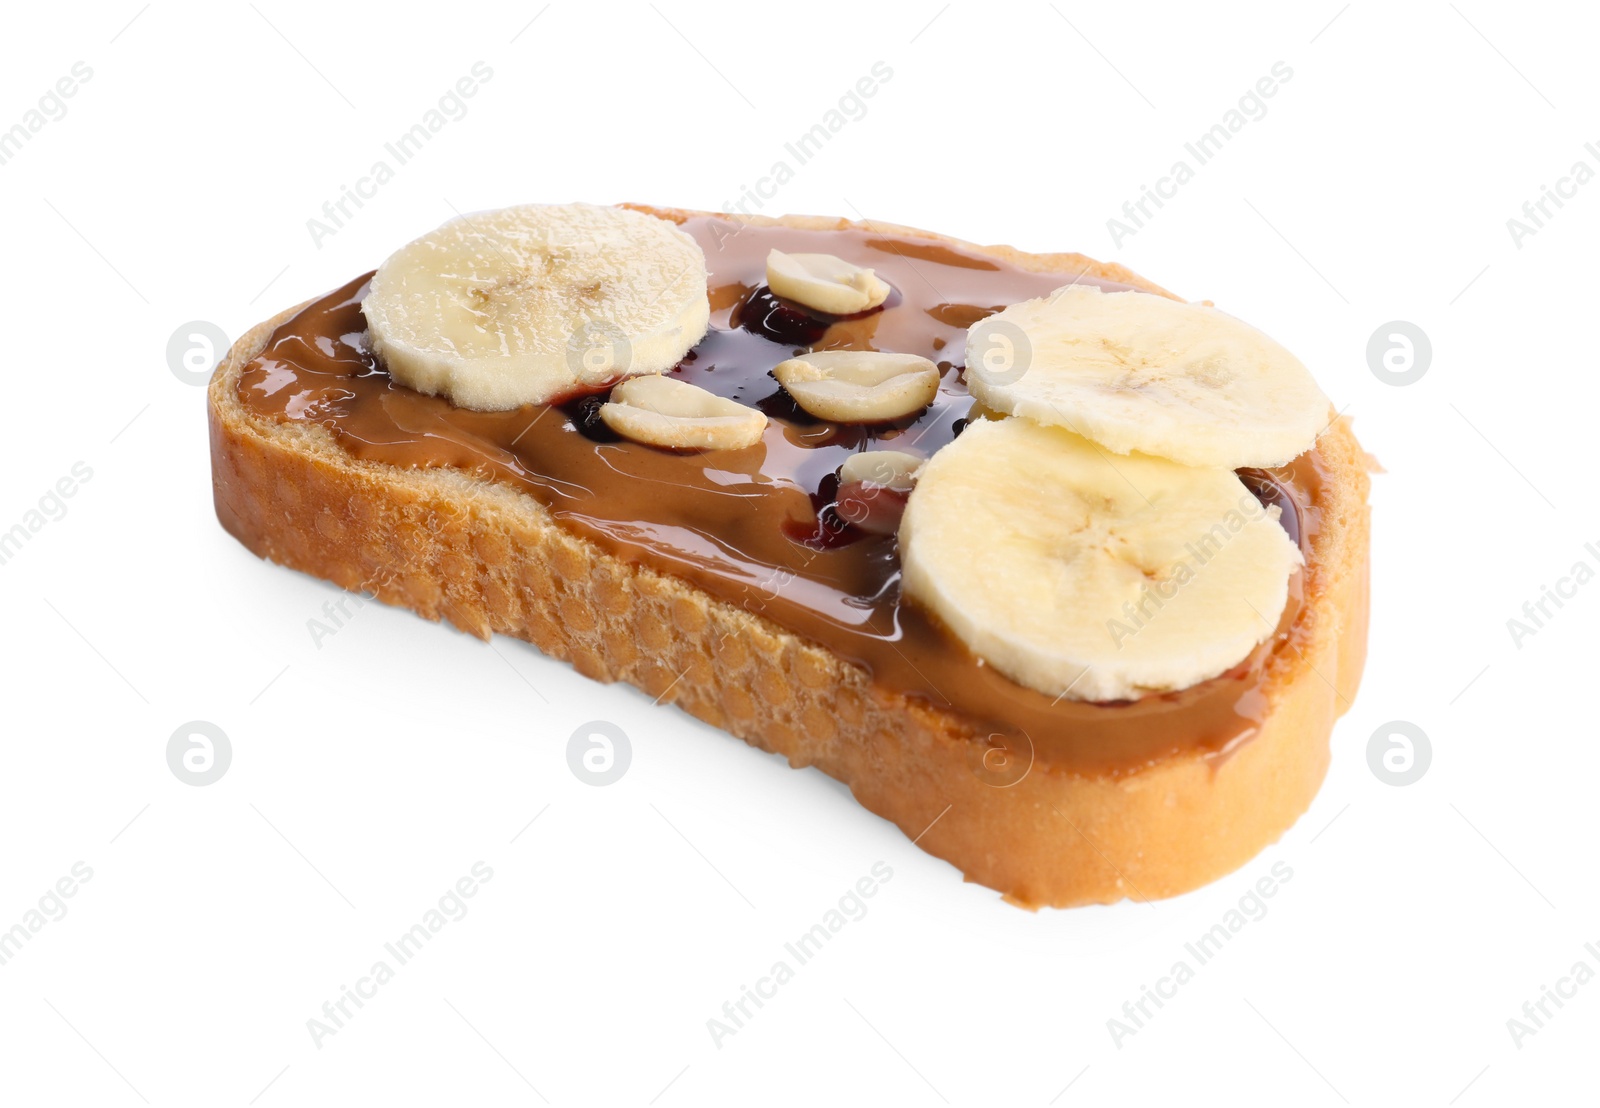 Photo of Toast with tasty nut butter, banana slices, jam and peanuts isolated on white